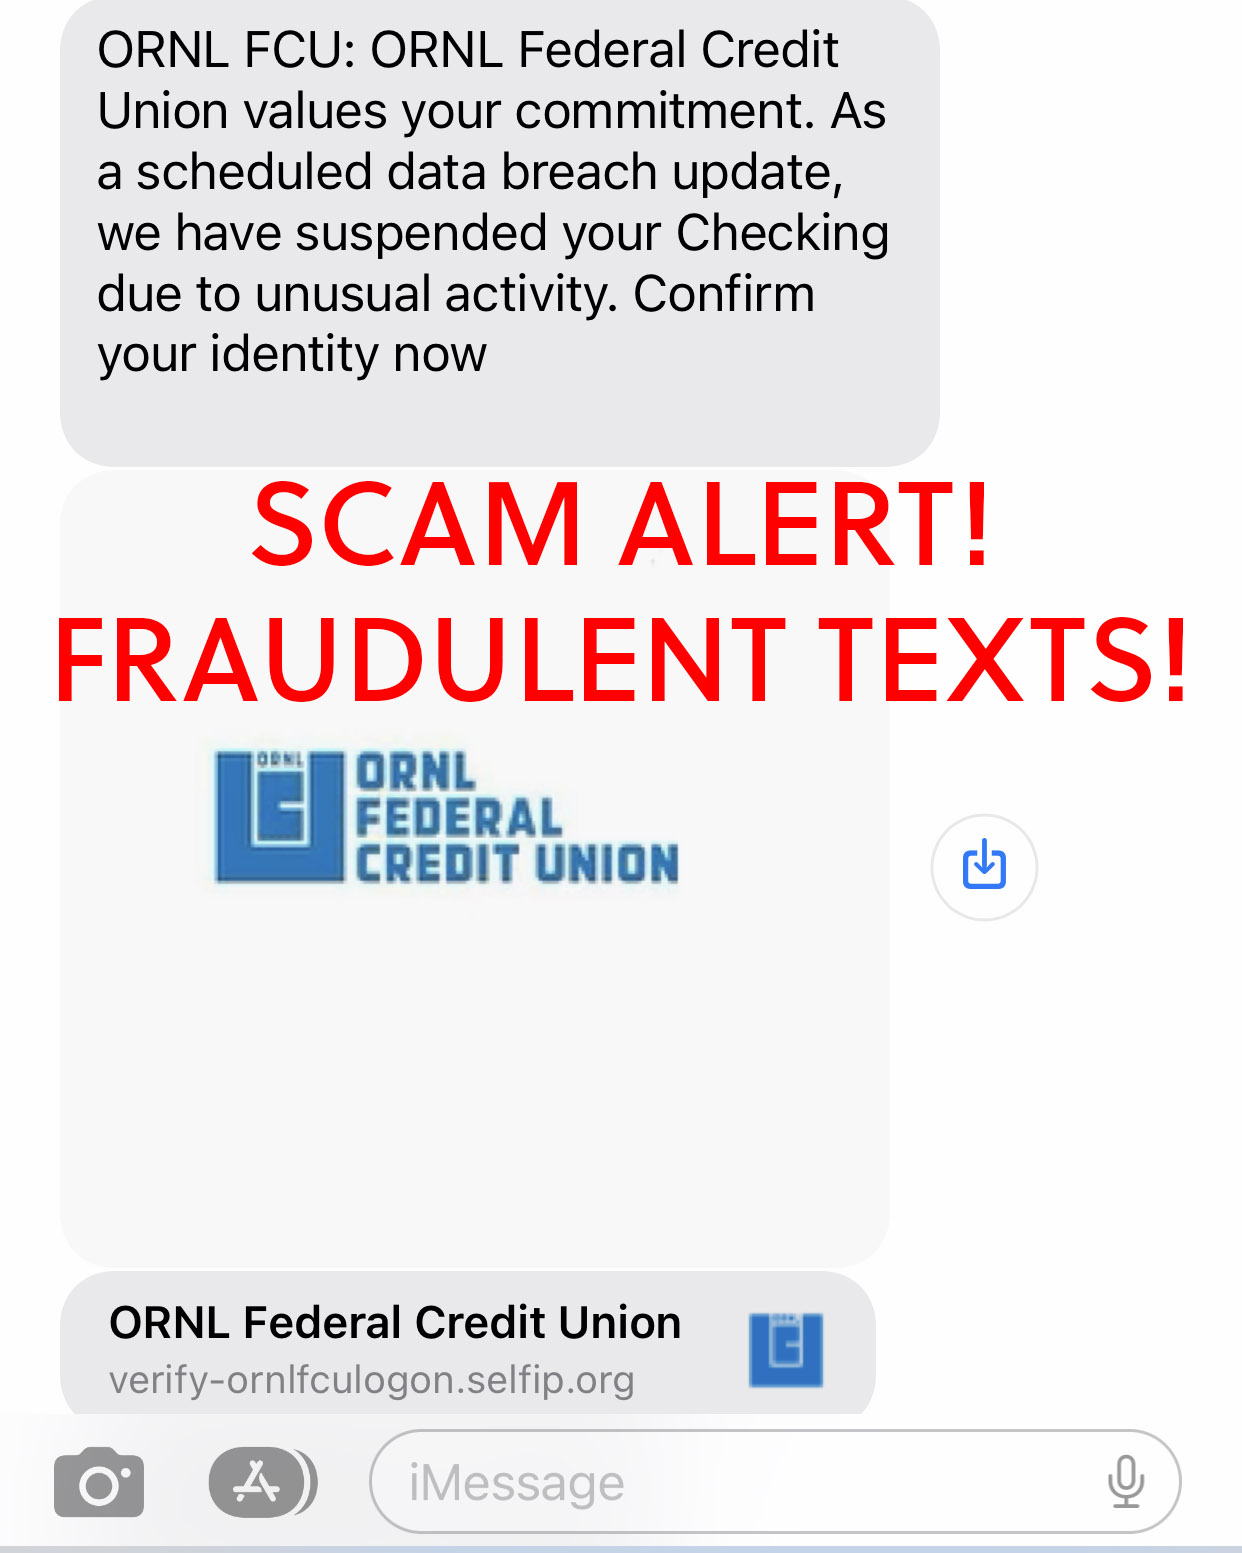 Scam Alerts and Fraudulent Text Alerts